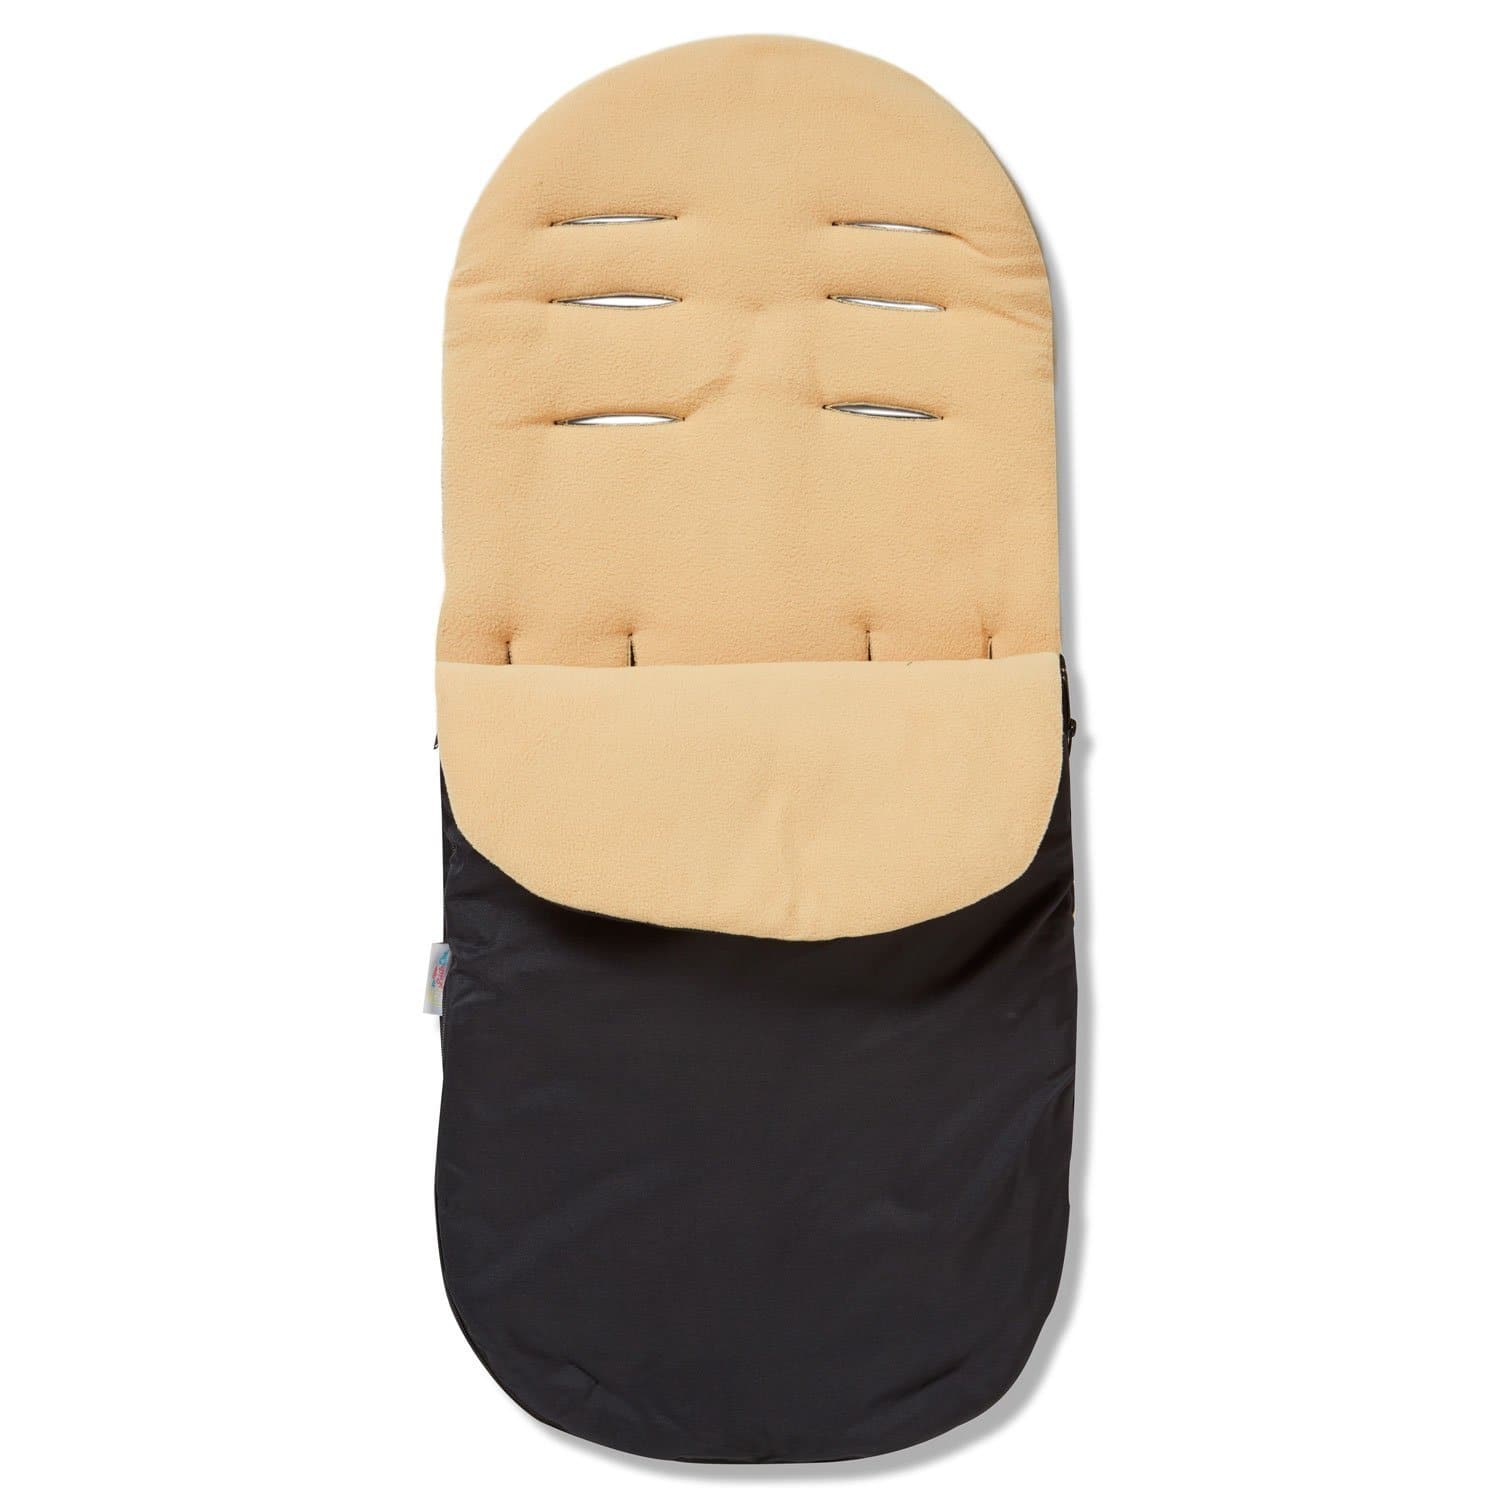 Footmuff / Cosy Toes Compatible with Maclaren - Sand / Fits All Models | For Your Little One